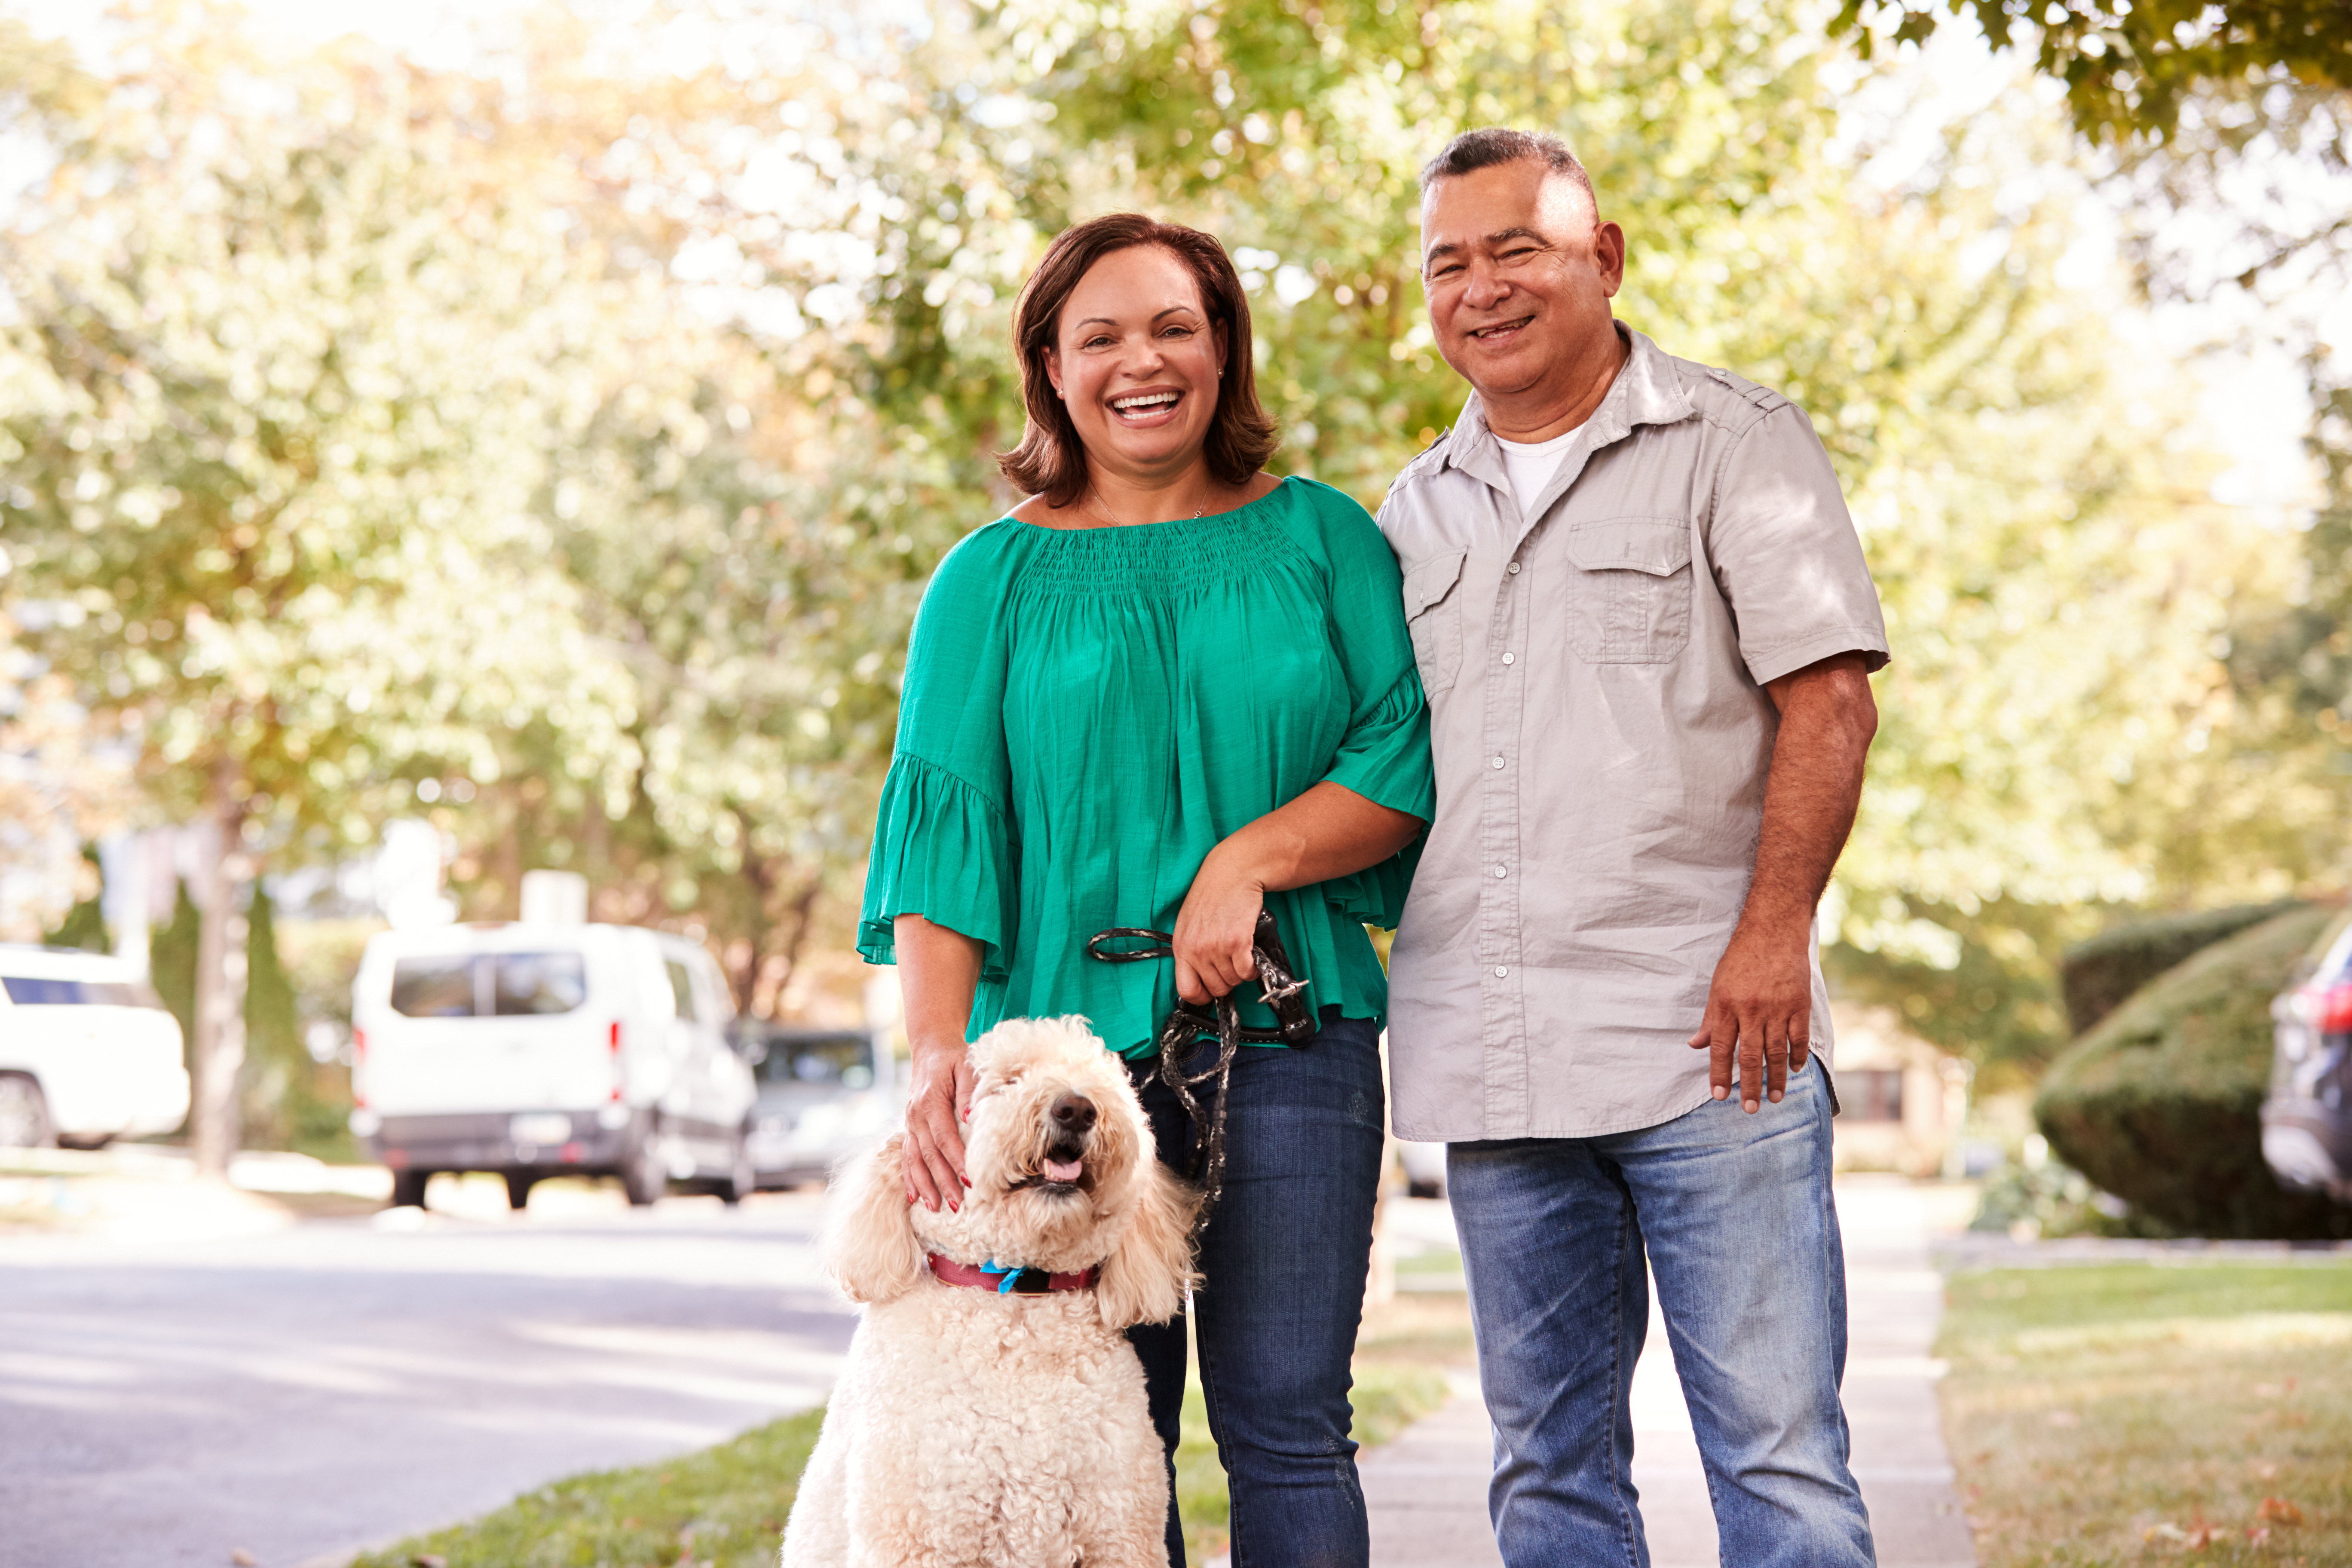 A senior couple standing with their dog in a street | Source: Shutterstock